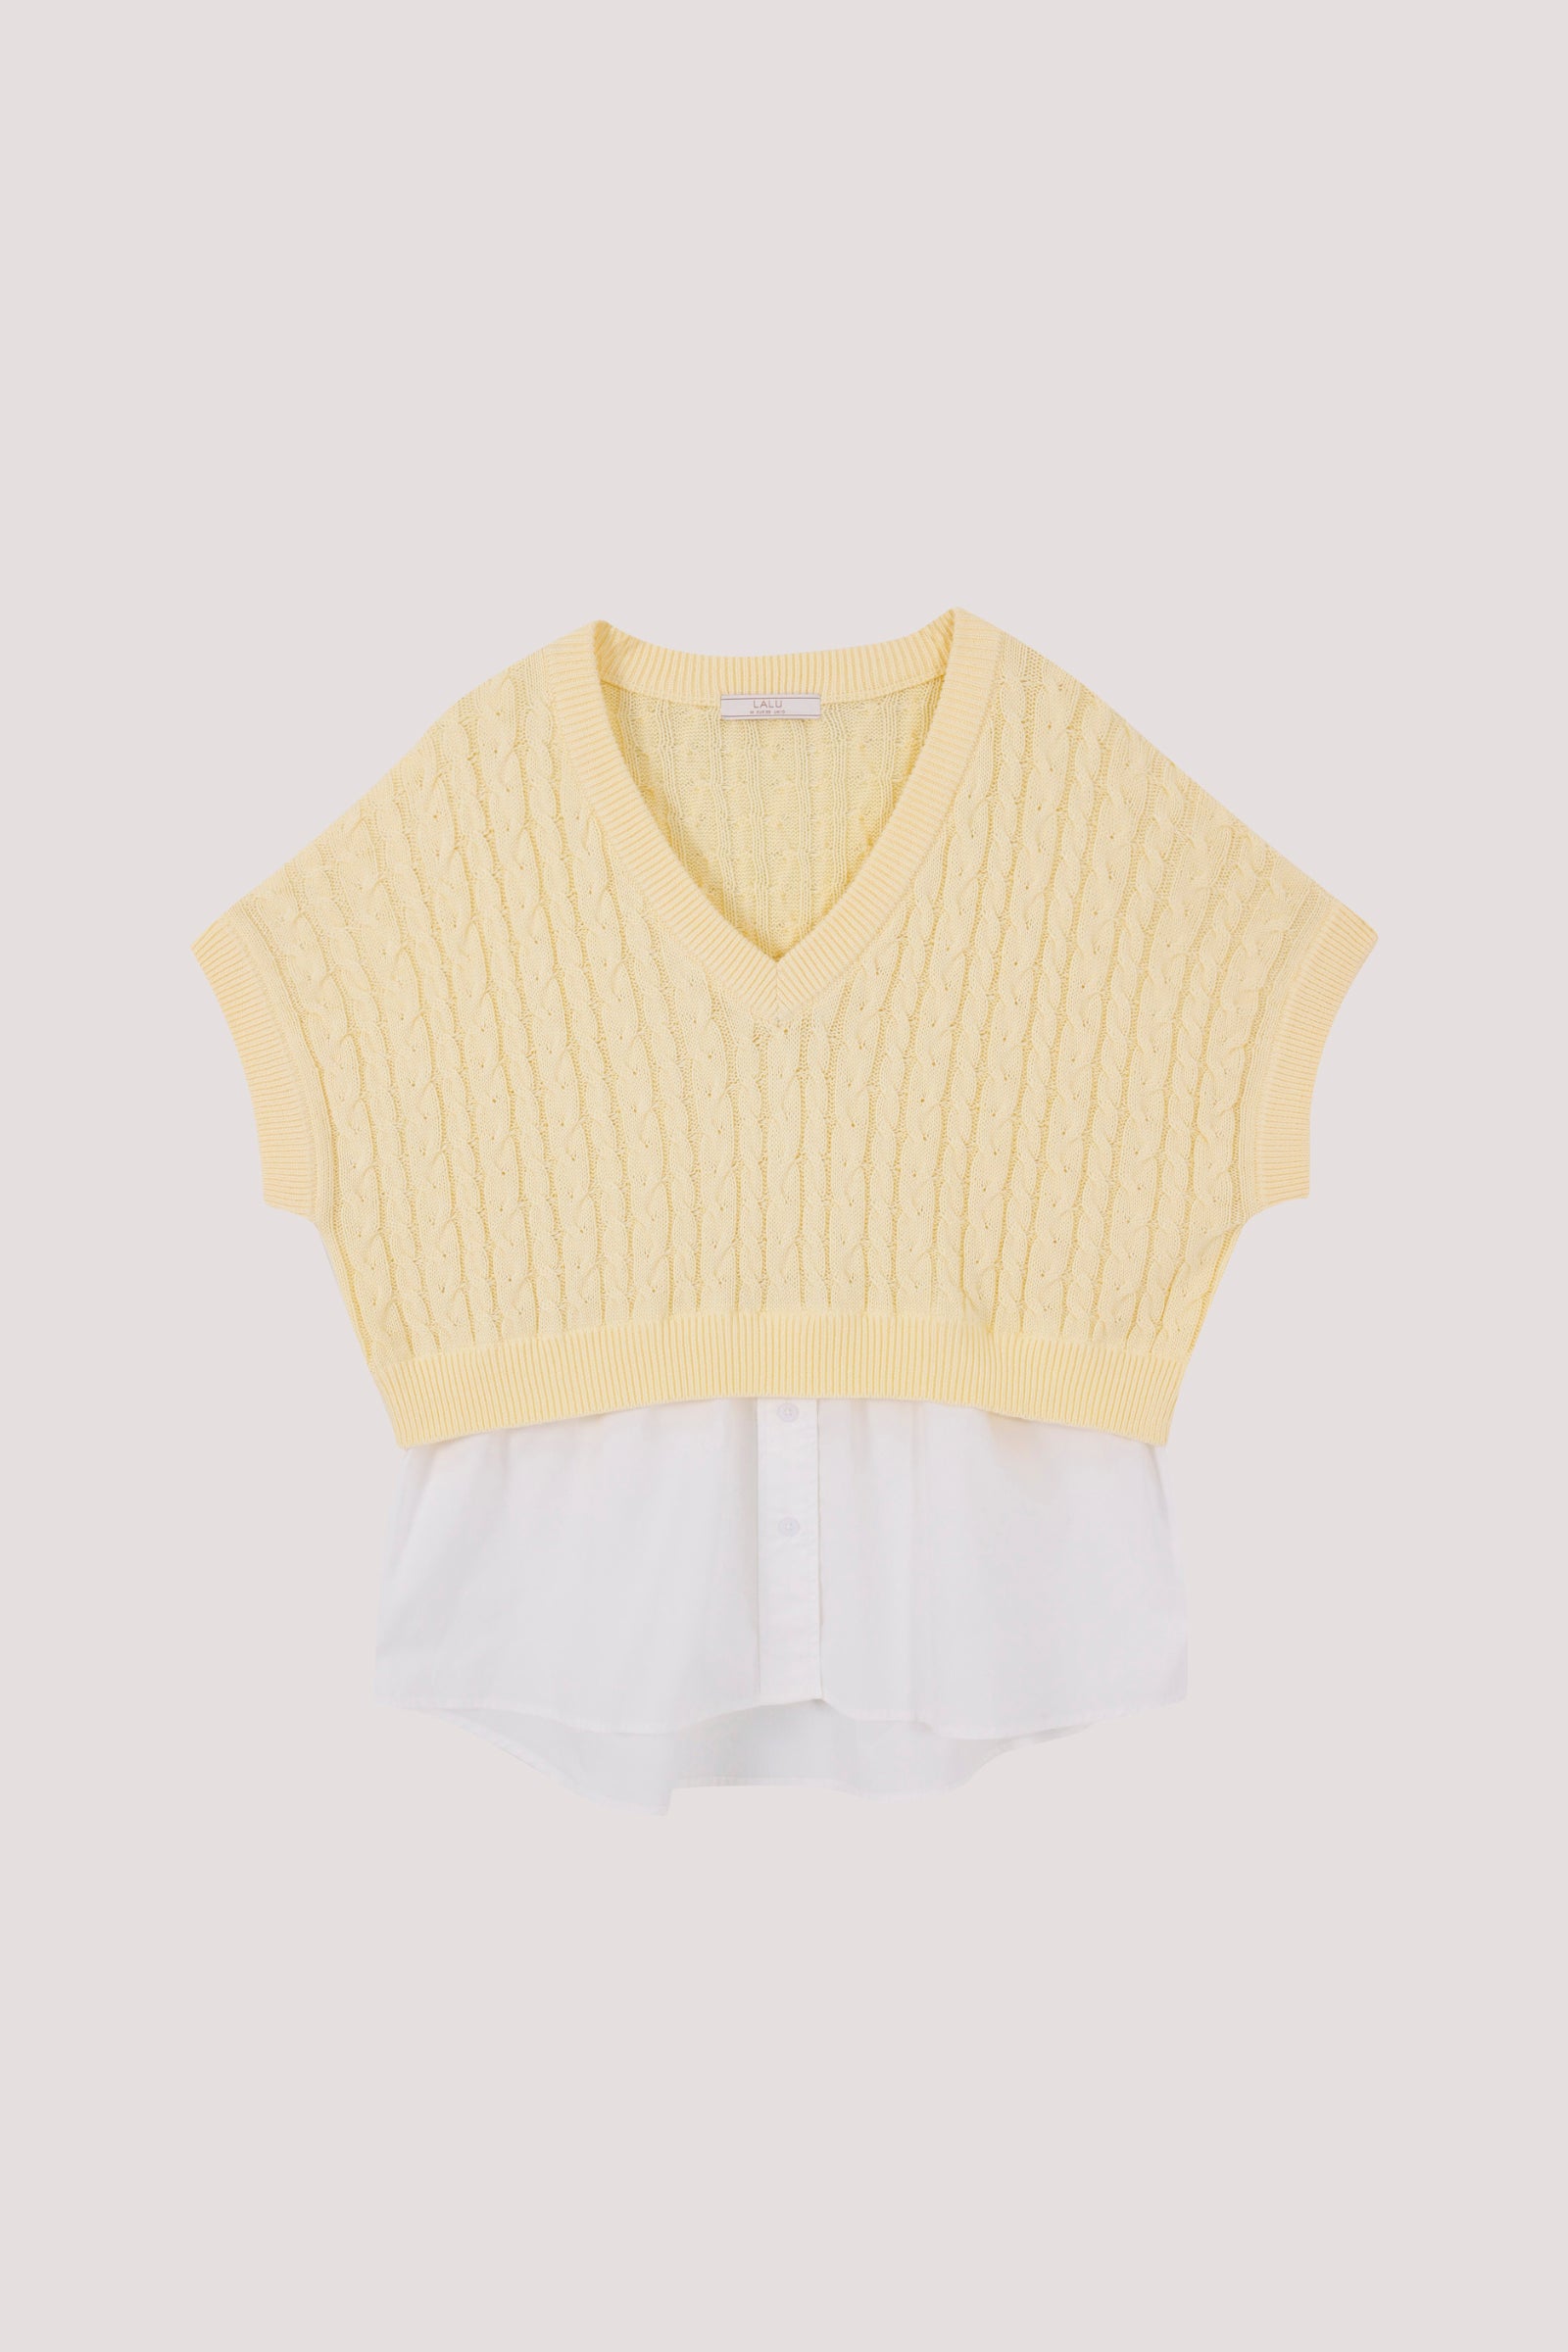 Knitted Vest Layered Shirt